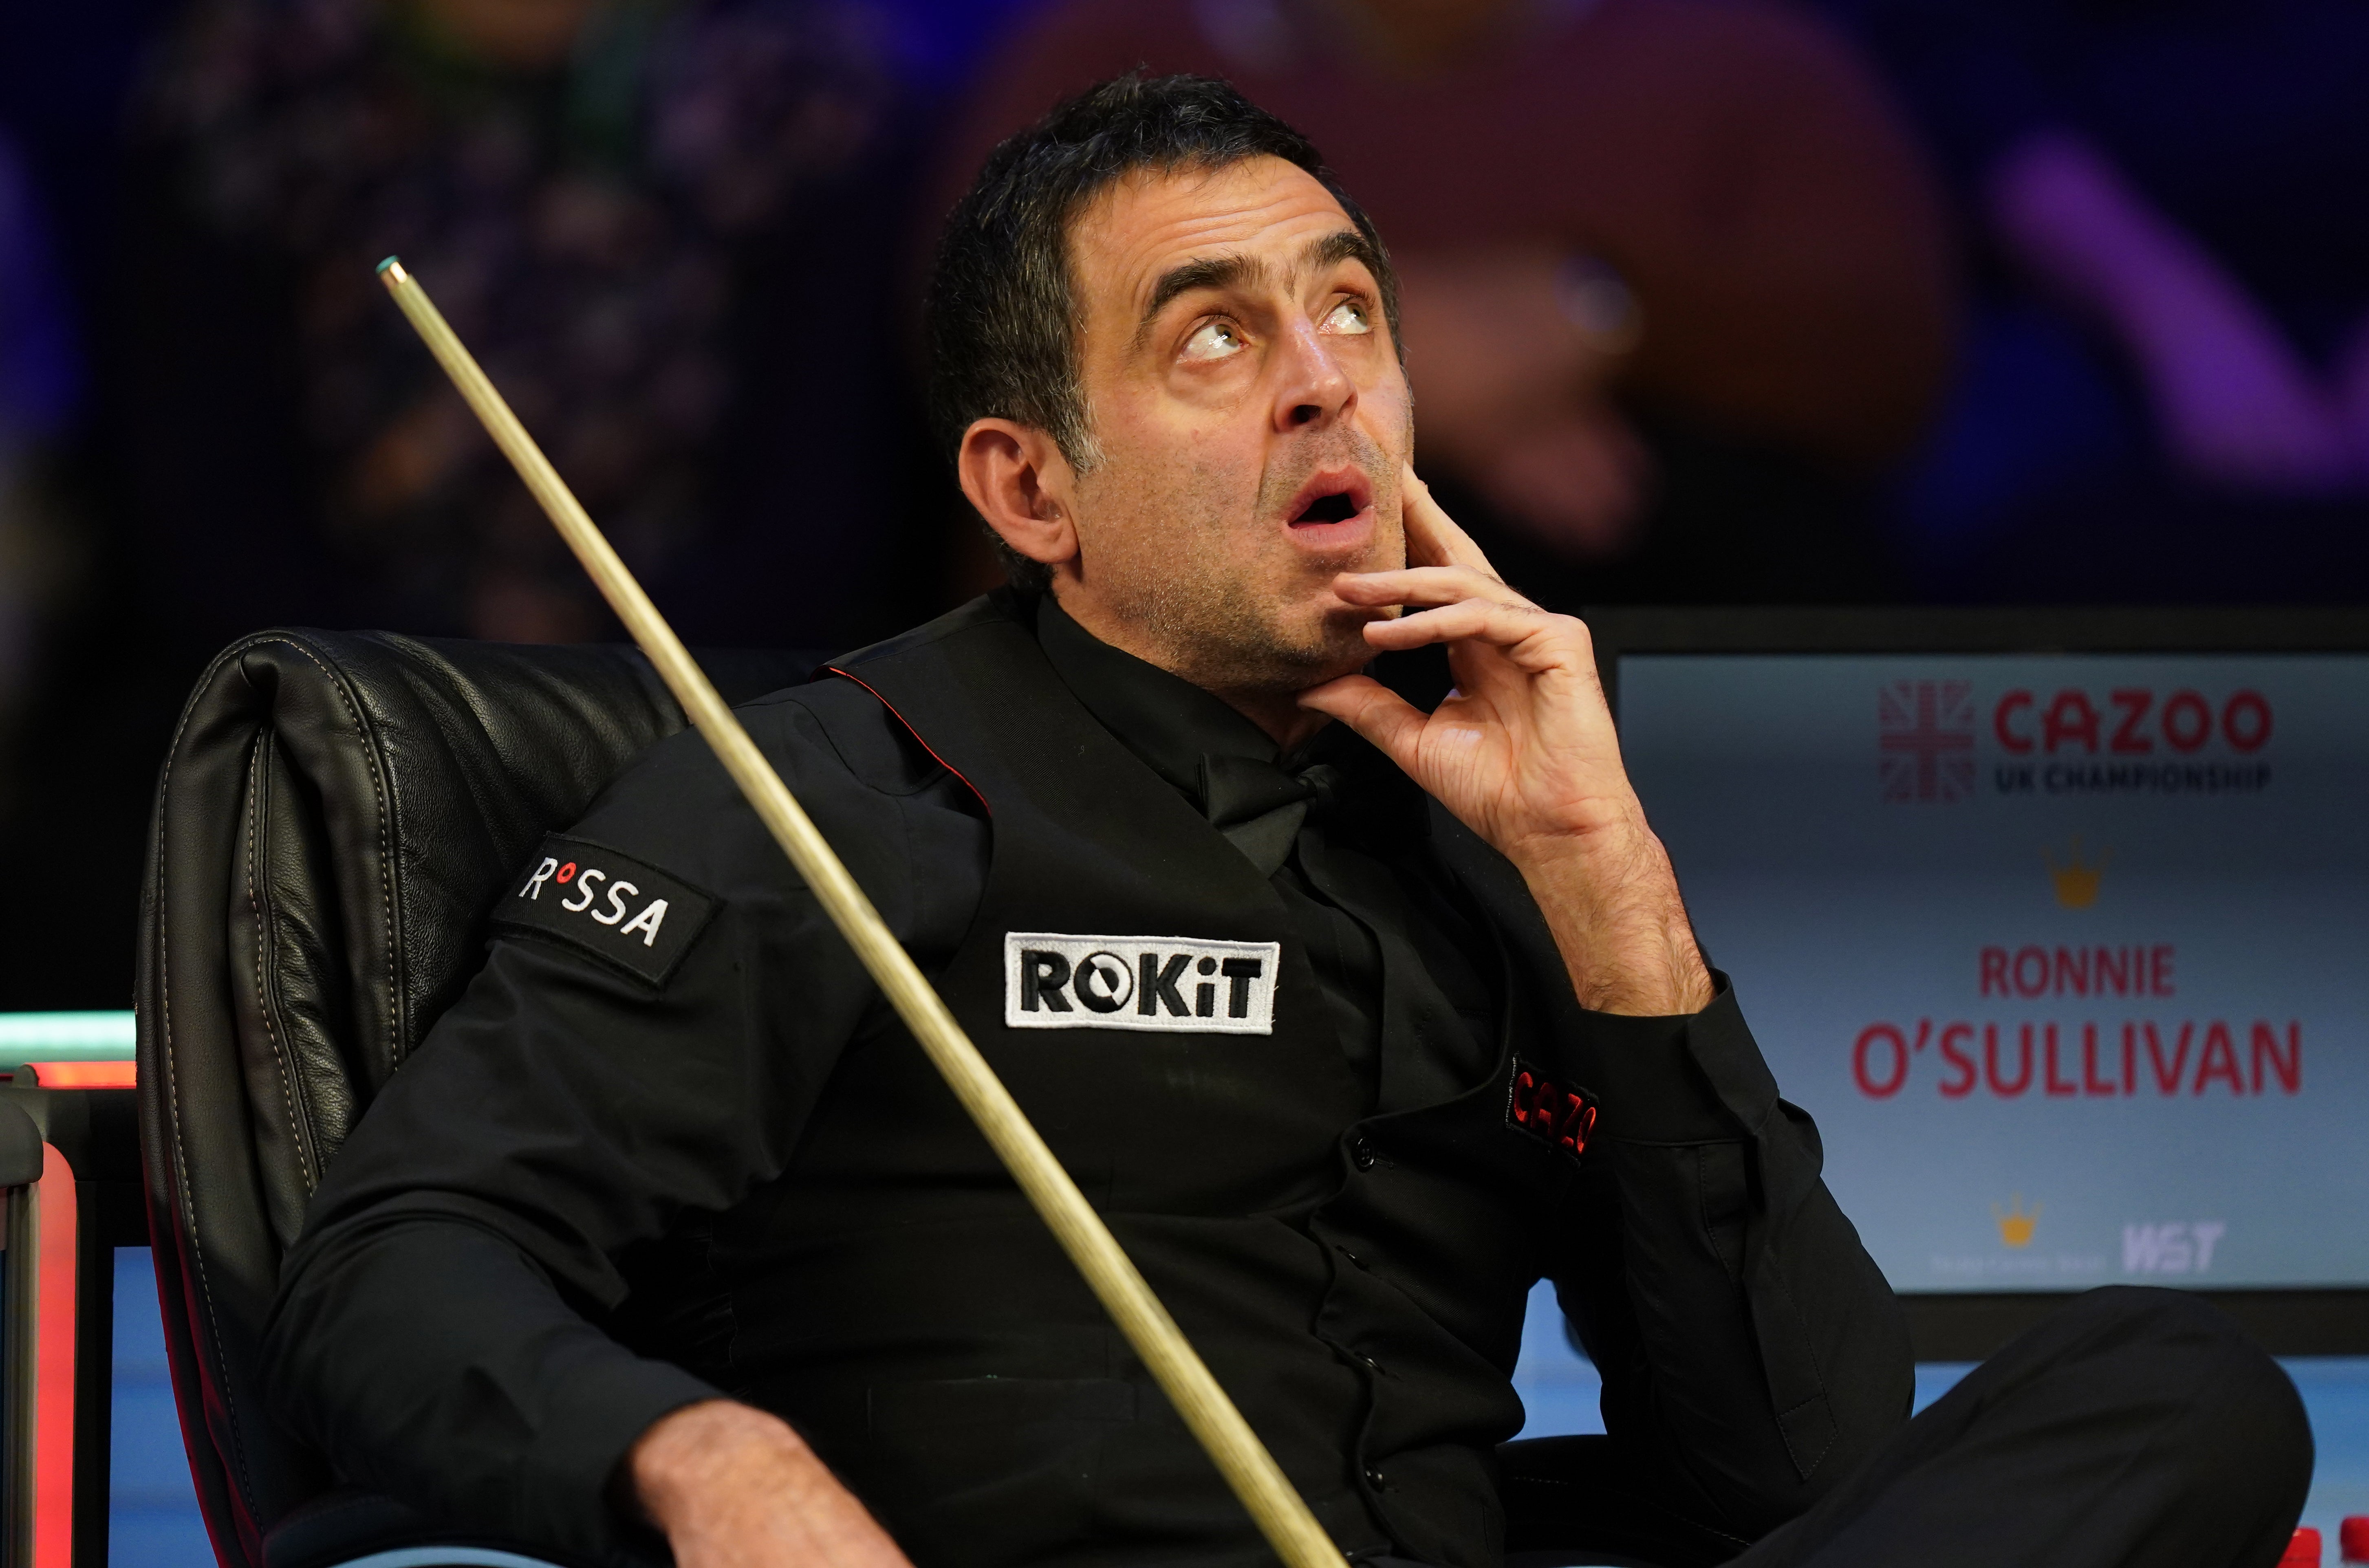 Ronnie O’Sullivan crashed out of the UK Championship in York (Mike Egerton/PA)